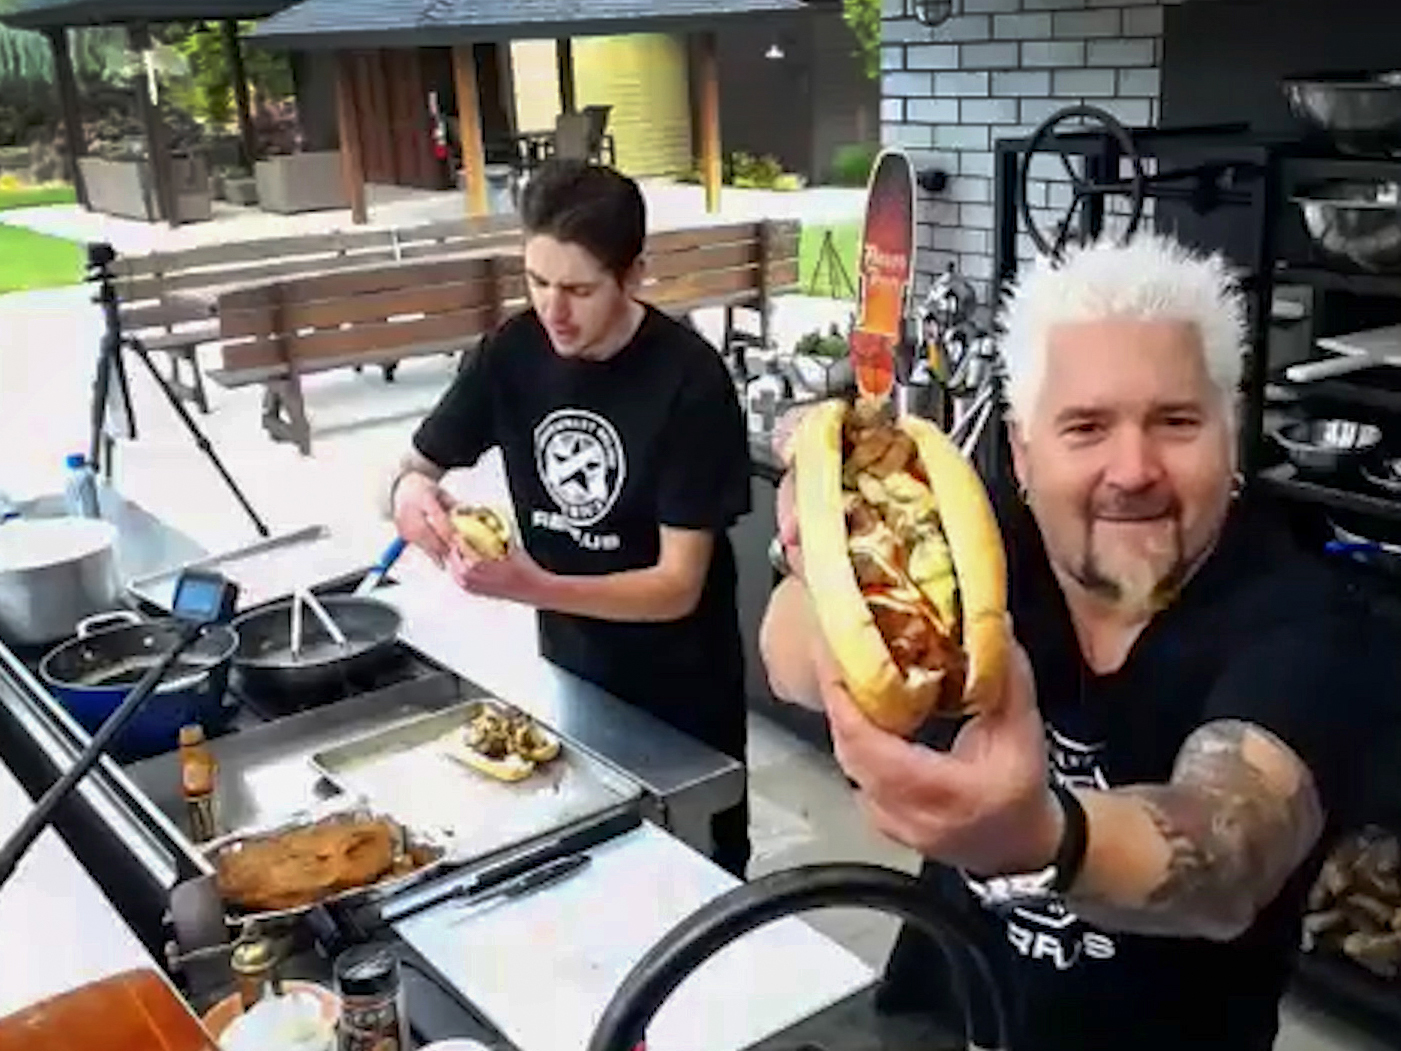 meat diners drive ins and dives